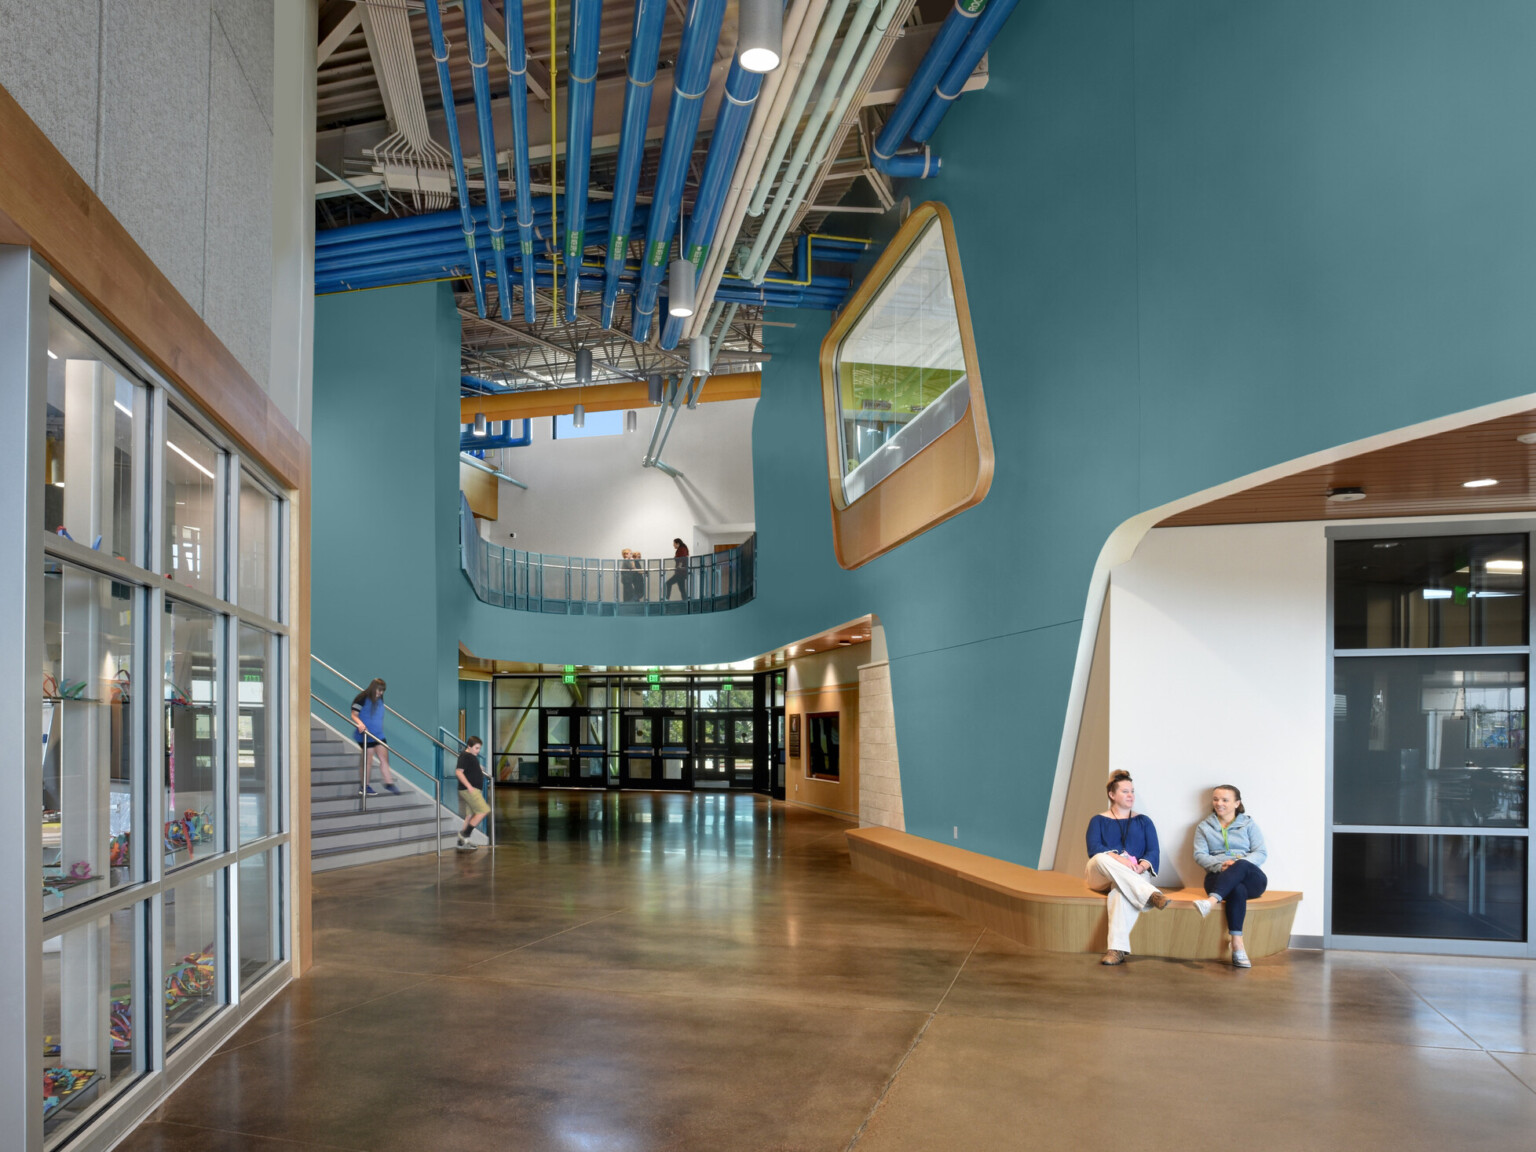 cathedral ceilings, large window that appears like a porthole to let in natural light, teal blue walls, polished concrete flooring, seating area